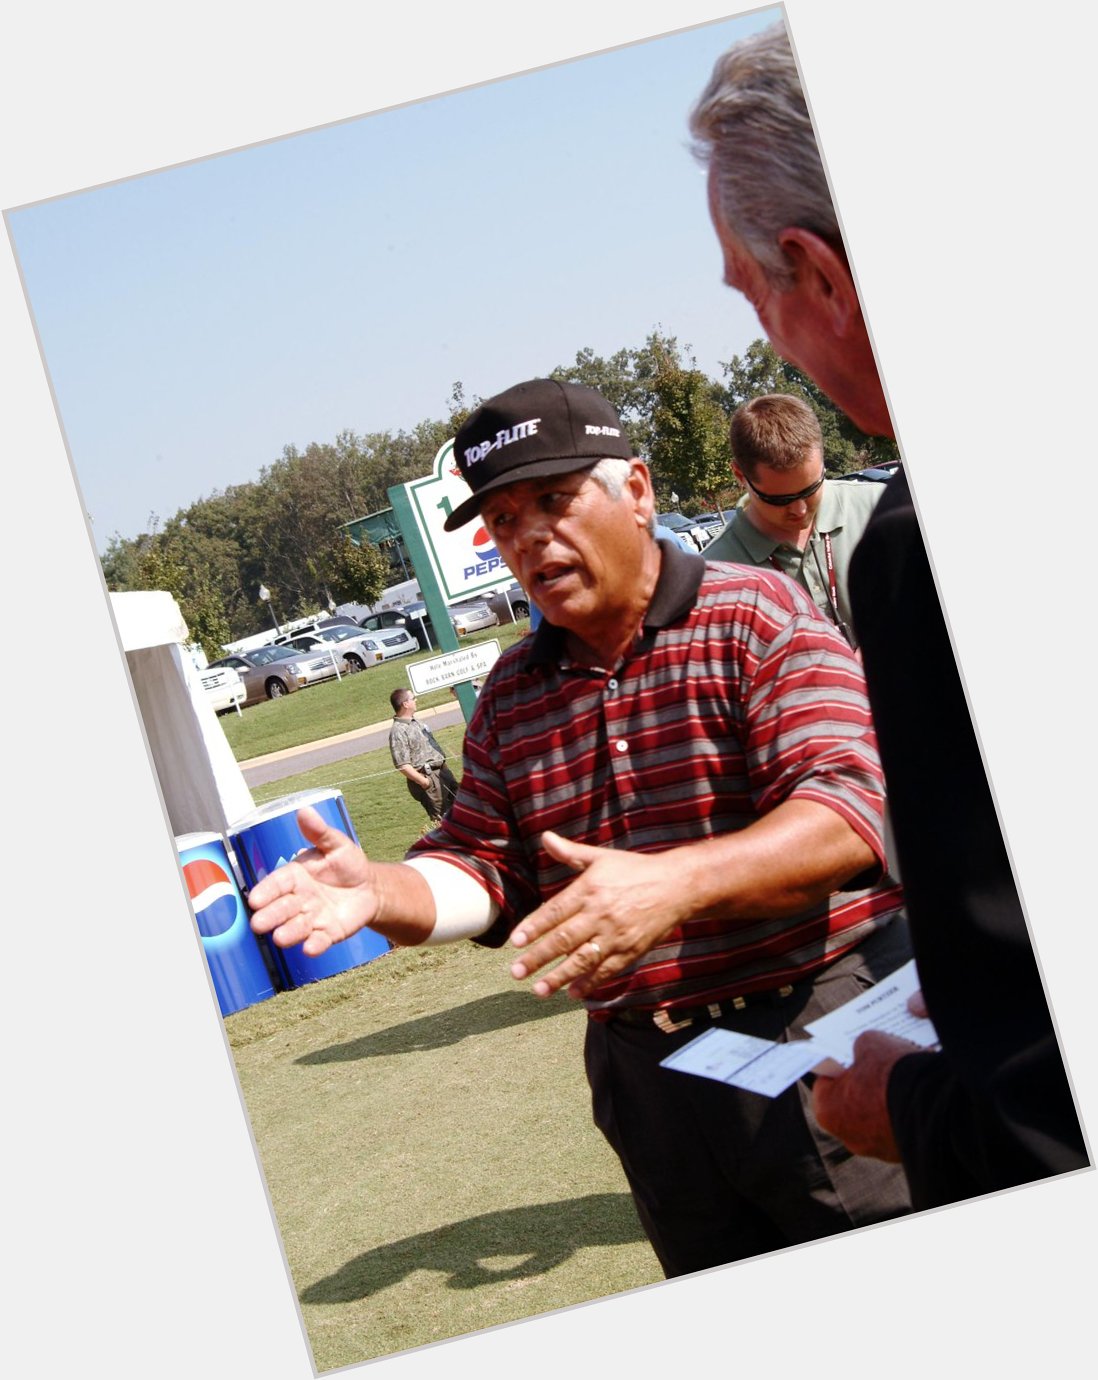 Happy 75th Birthday to an all-time great, Lee Trevino!  